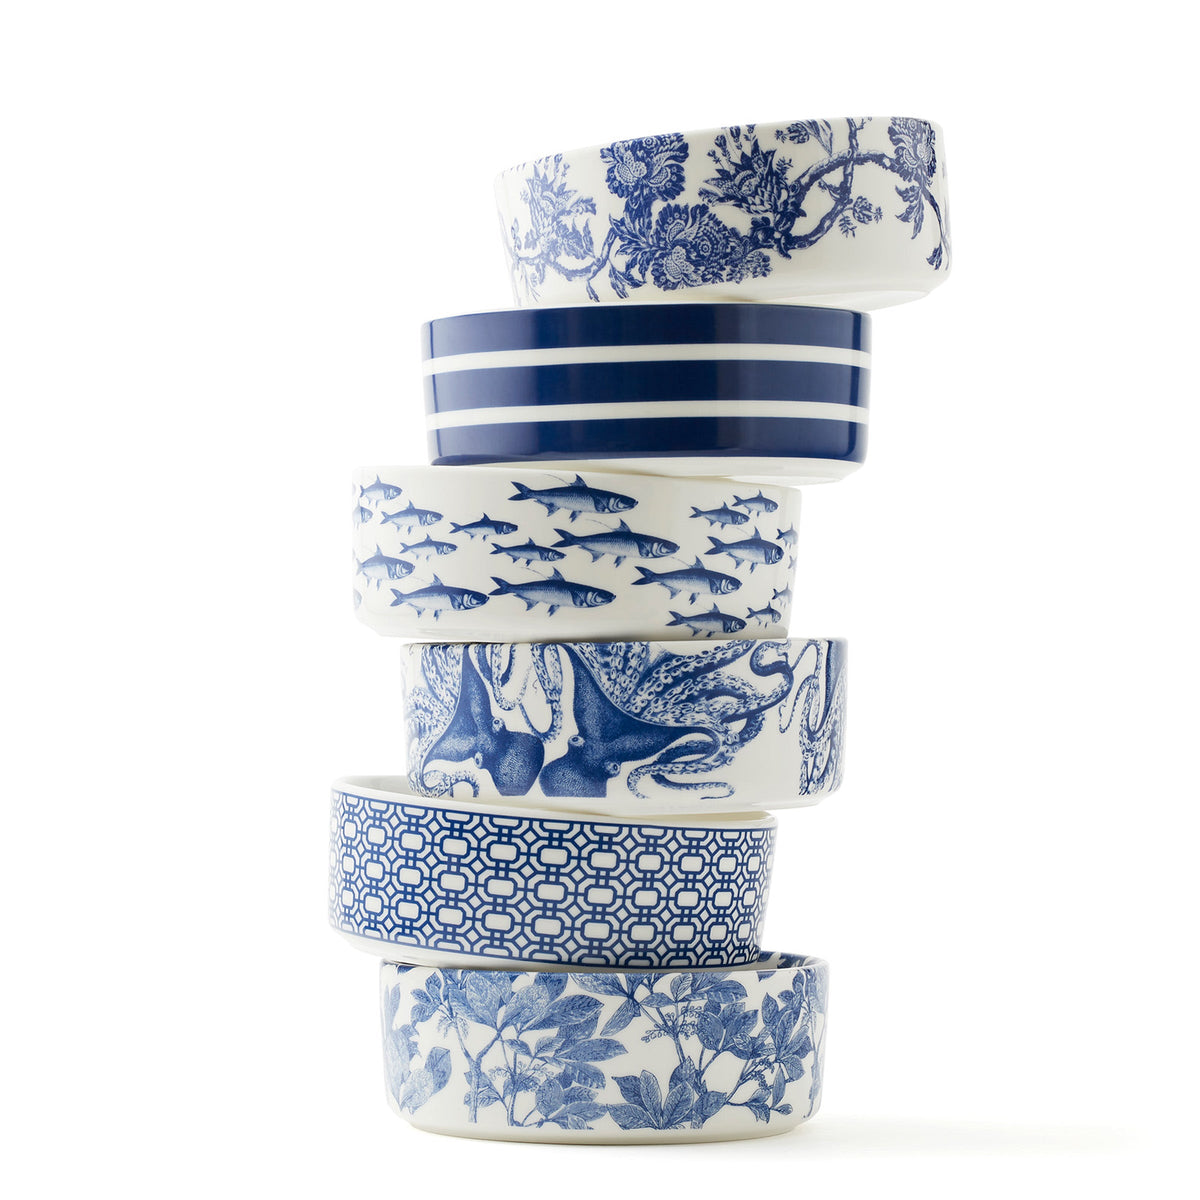 A stack of Caskata Newport Garden Gate Large Pet Bowls, consisting of blue and white bowls.